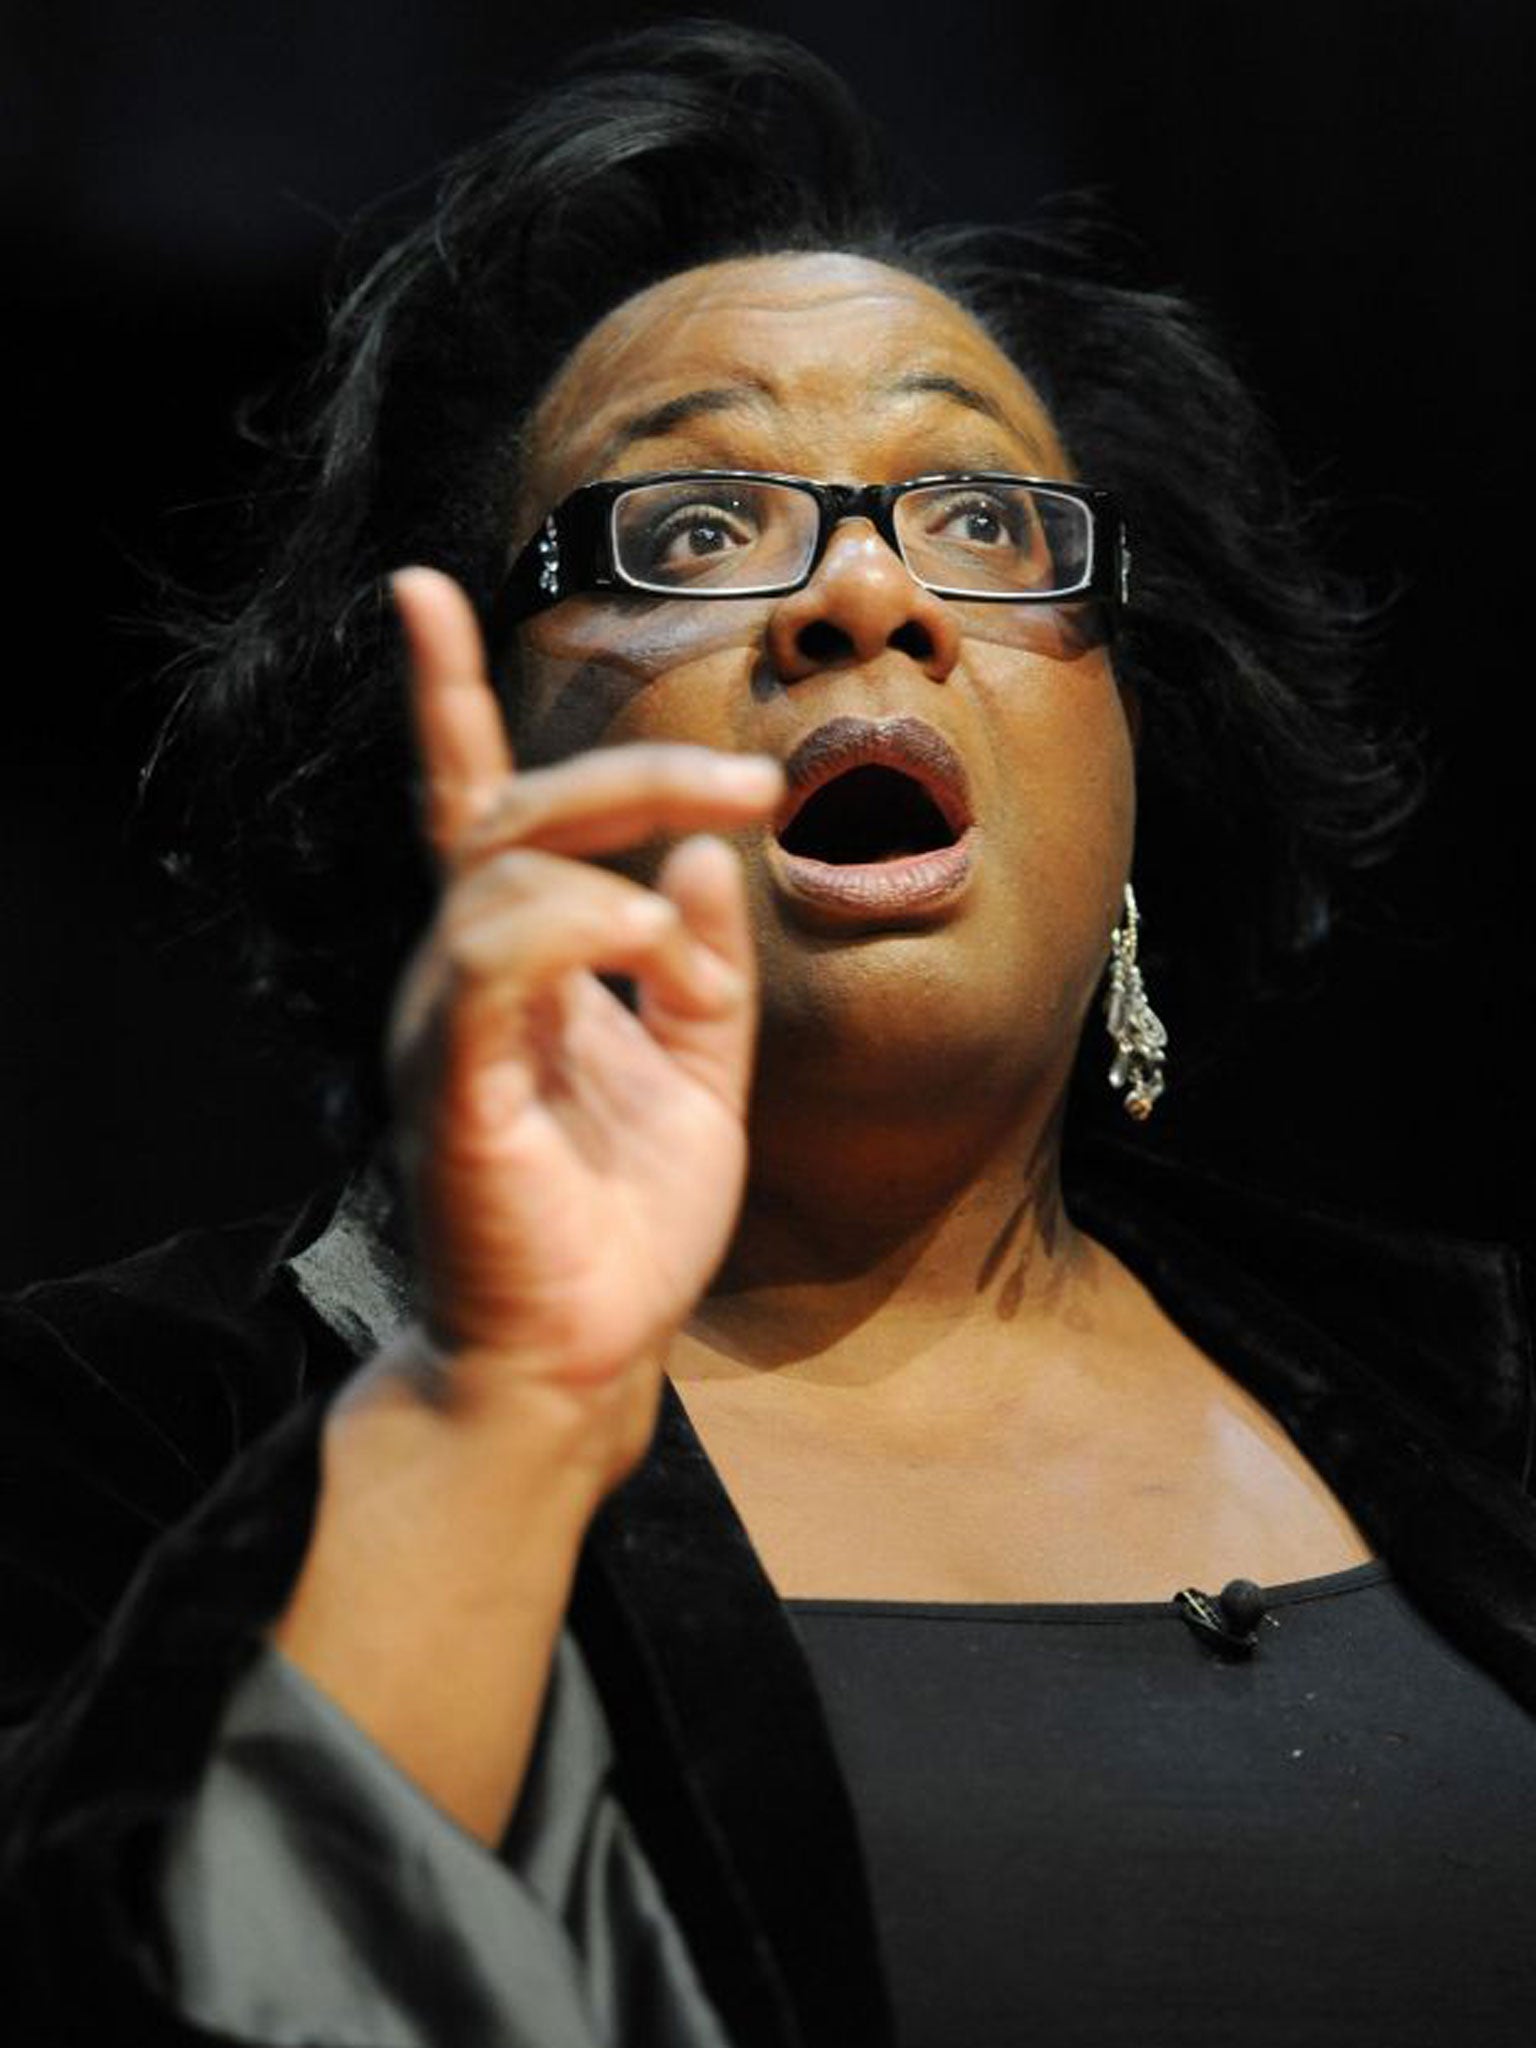 Diane Abbott said she lost her frontbench position because she defied instructions from Labour HQ not to take a position on potential British strikes against Syria in advance of a crucial House of Commons vote